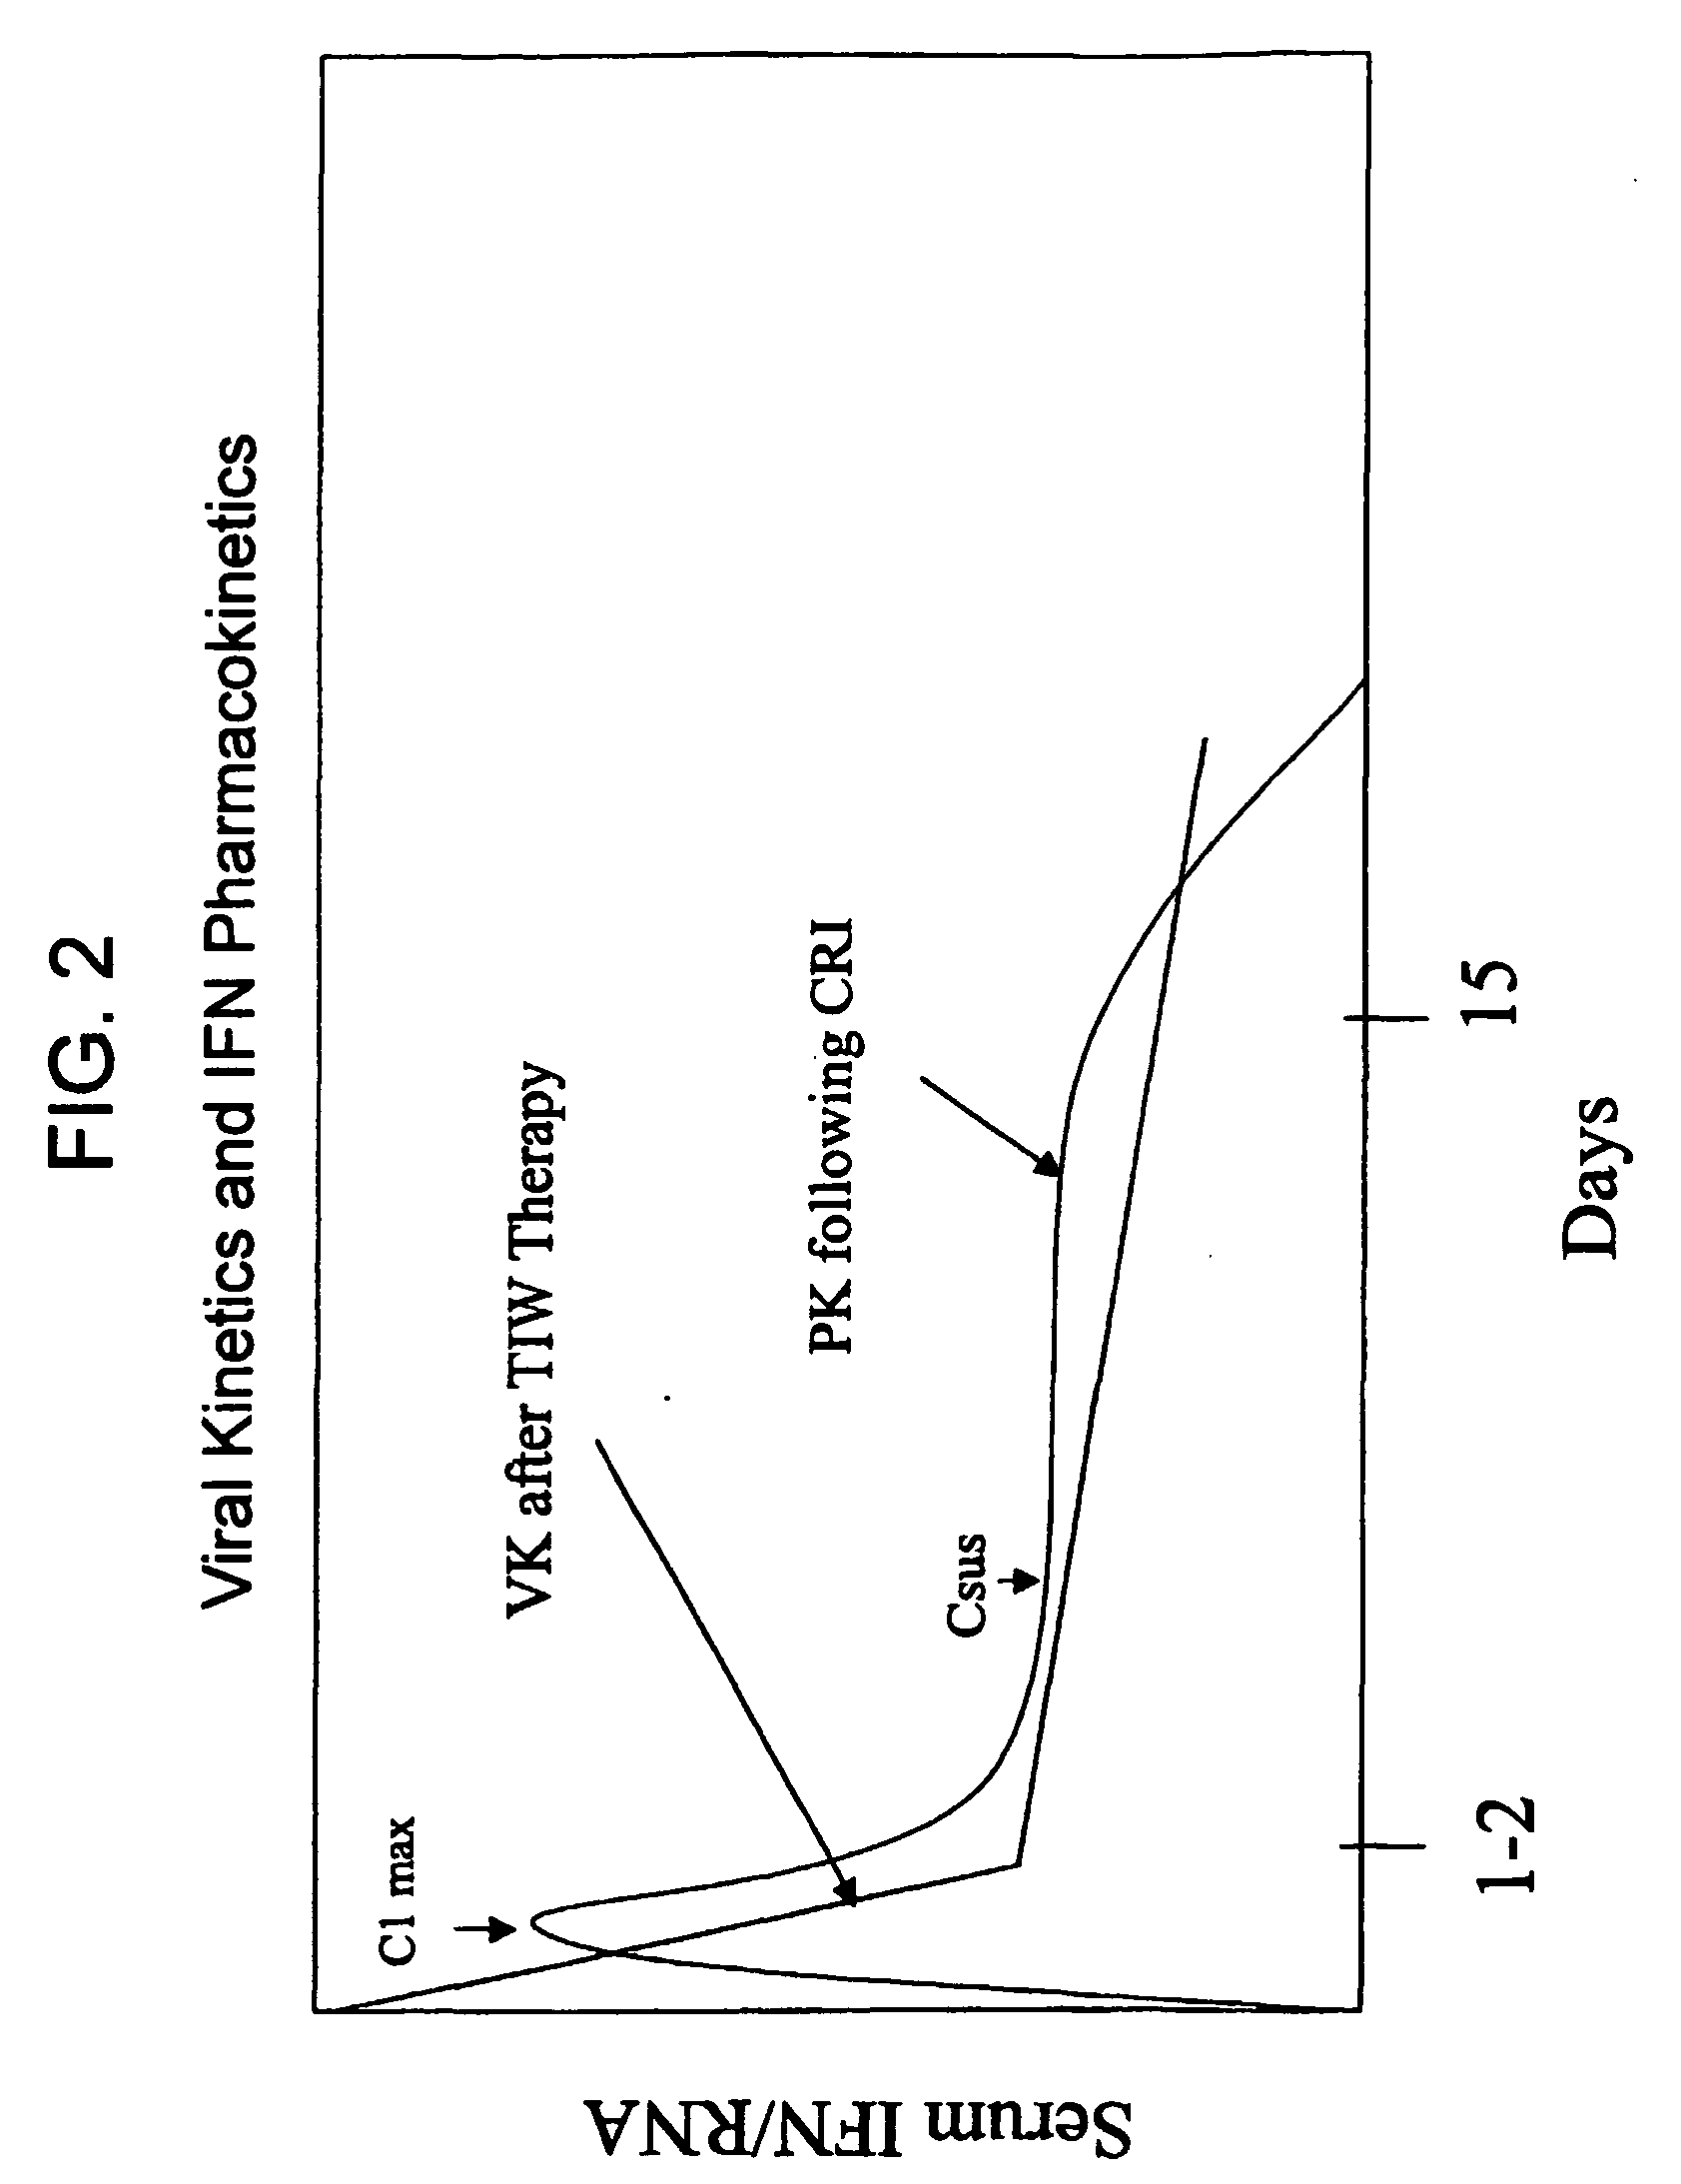 Compositions and method for treating hepatitis virus infection